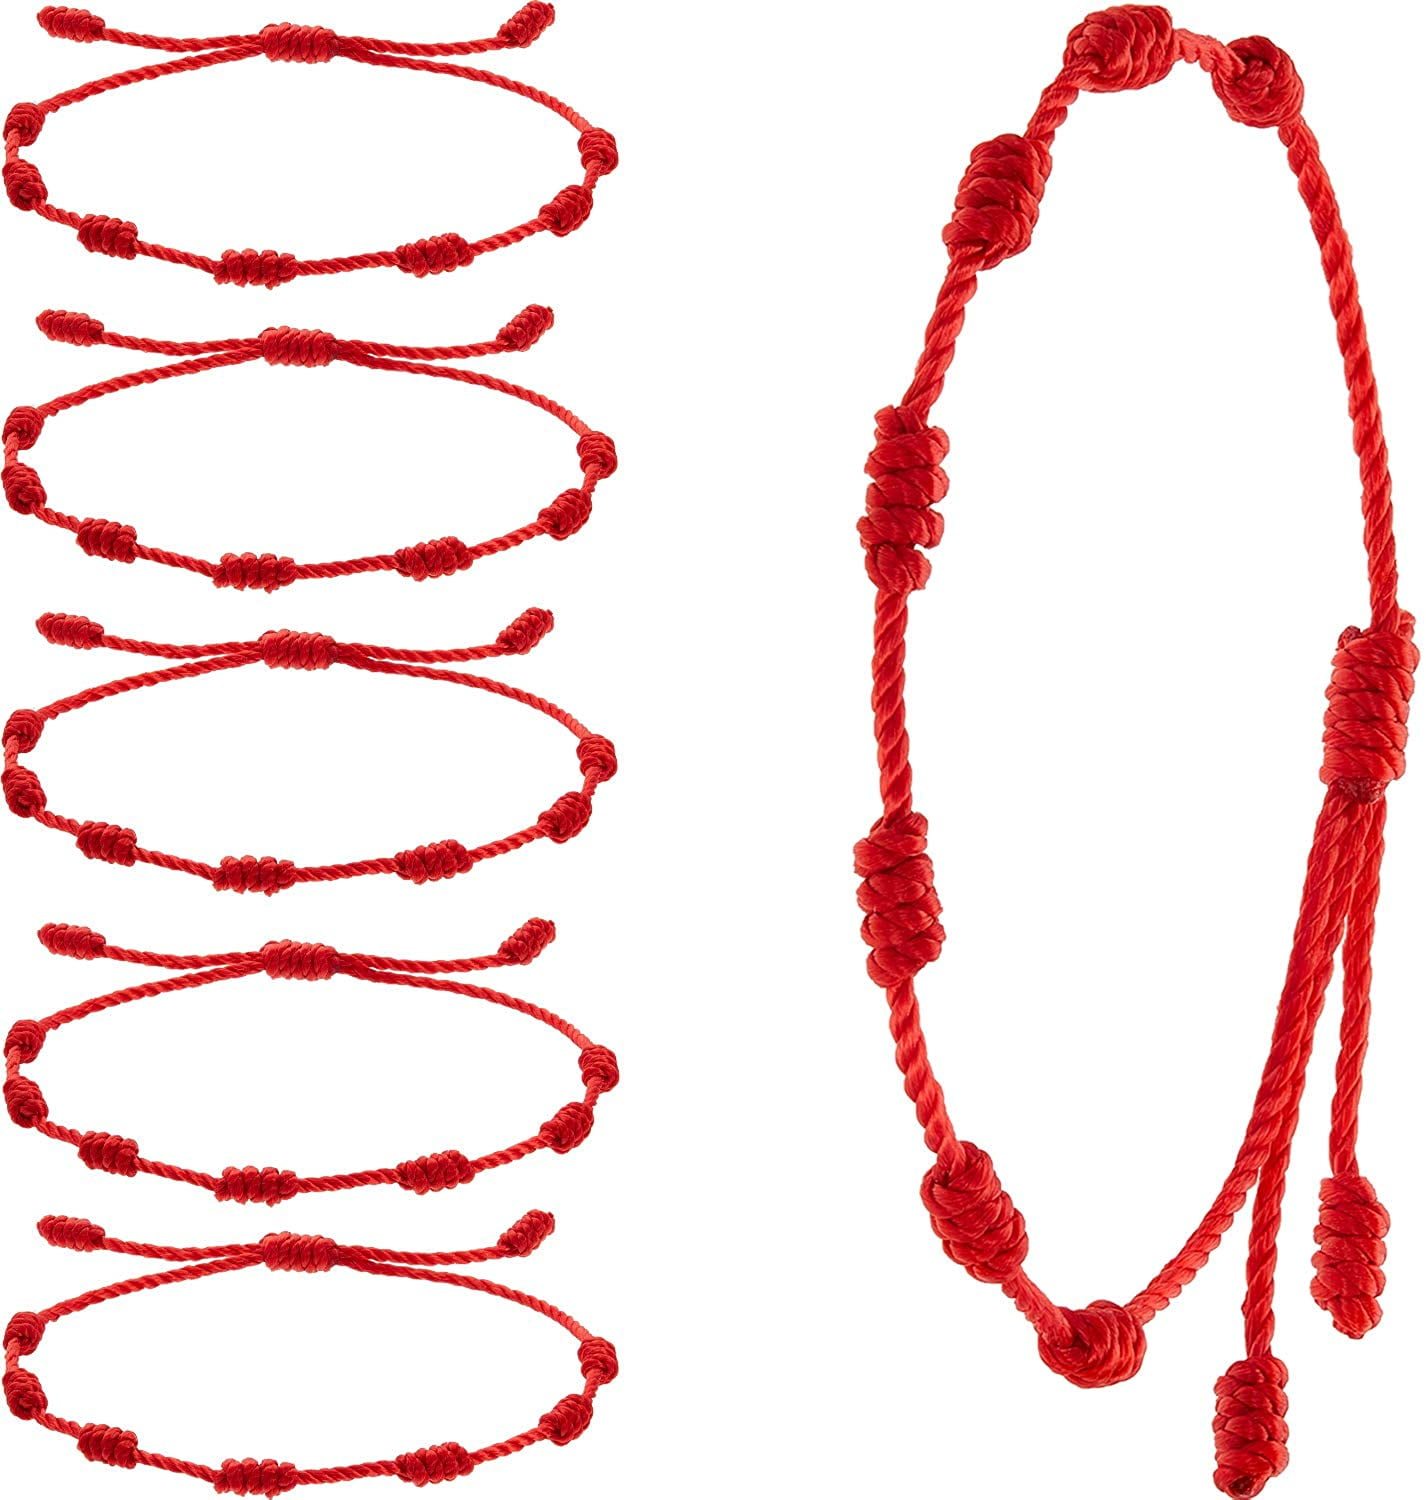 Red String Bracelet For Luck, Protection and The Red Thread of Hope. 